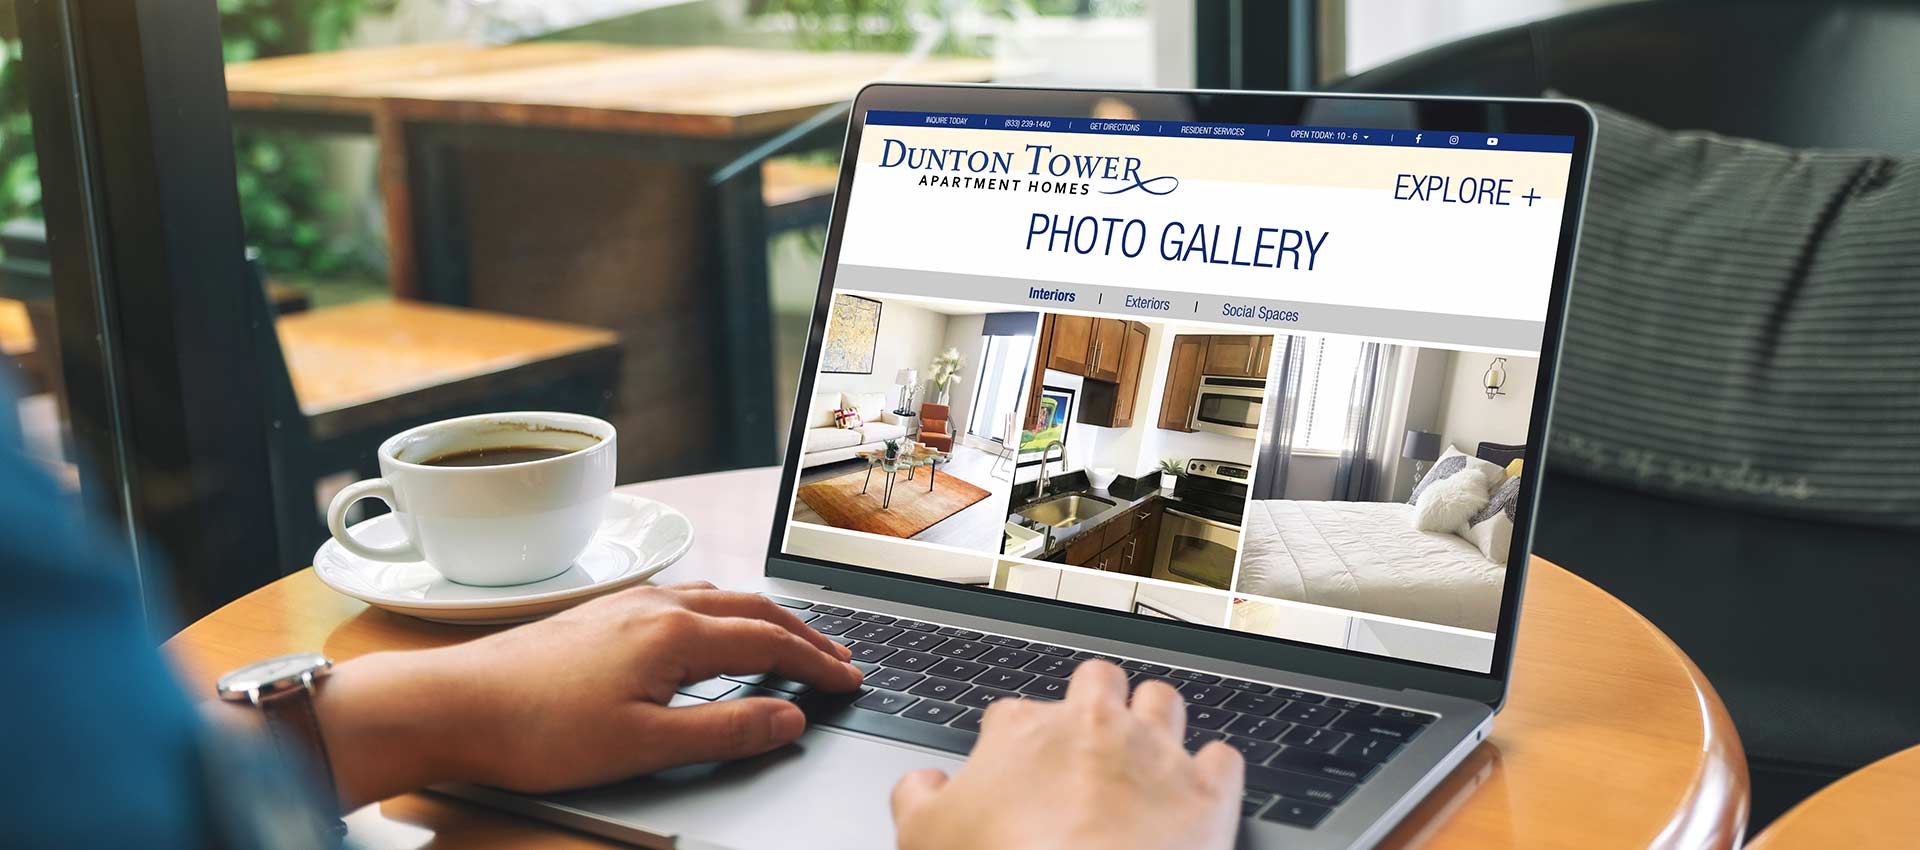 Person sitting at laptop viewing the Dunton Tower Apartments Website photo gallery, a TLC Management Company property